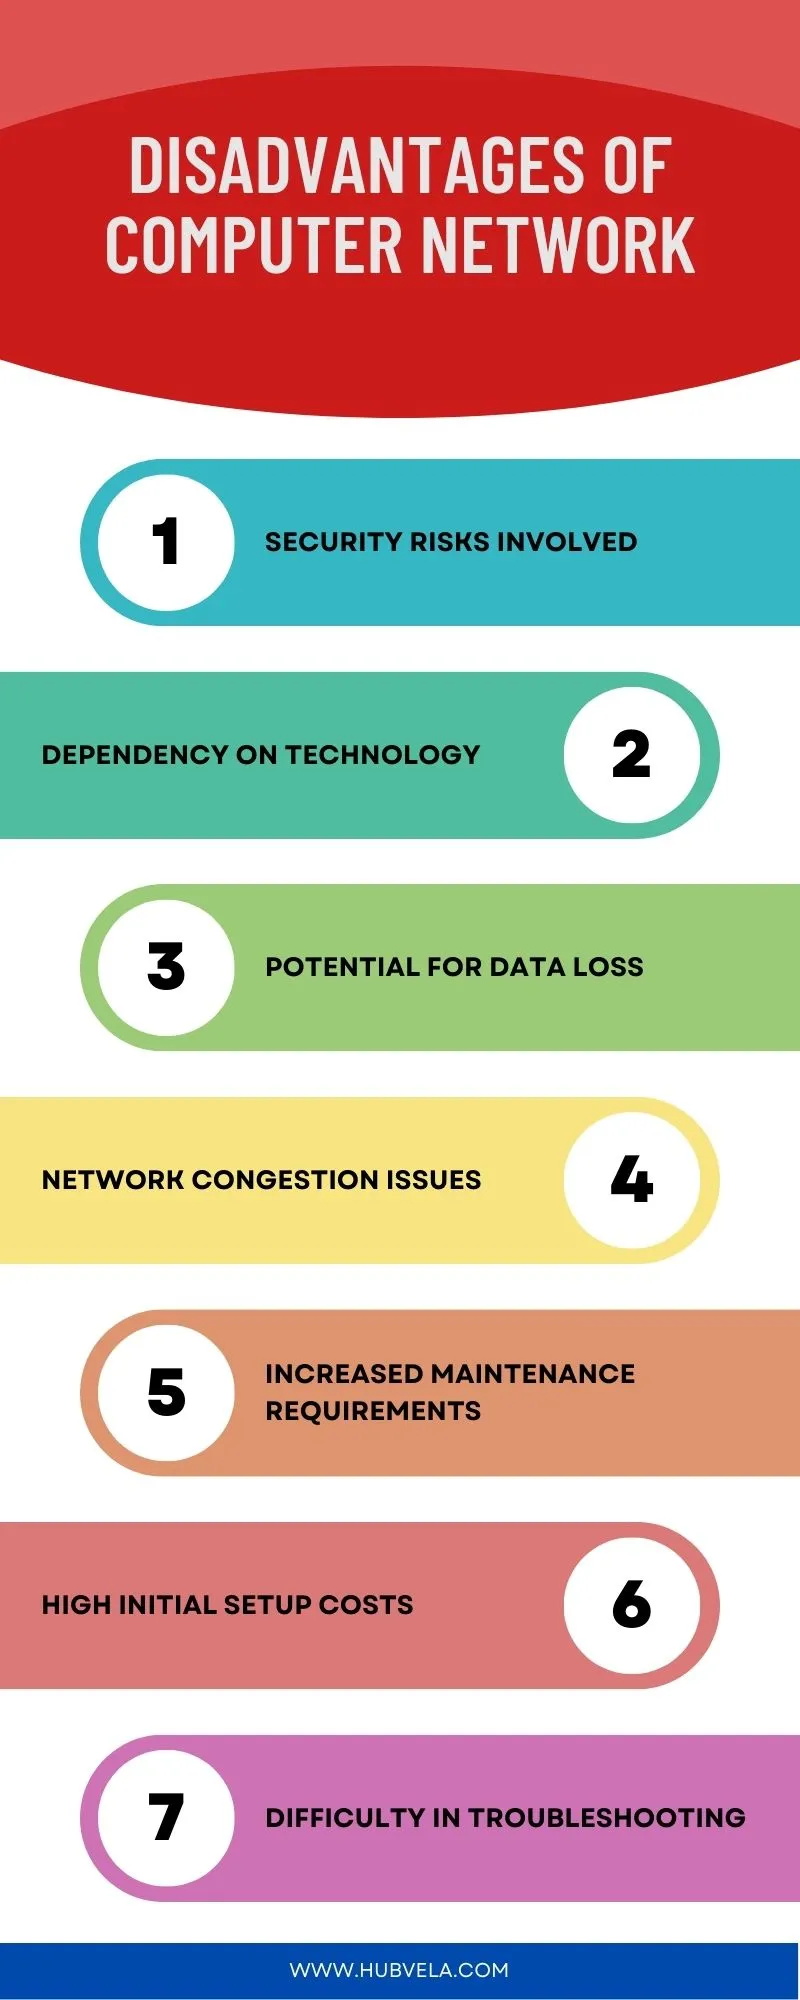 Disadvantages of Computer Network Infographic